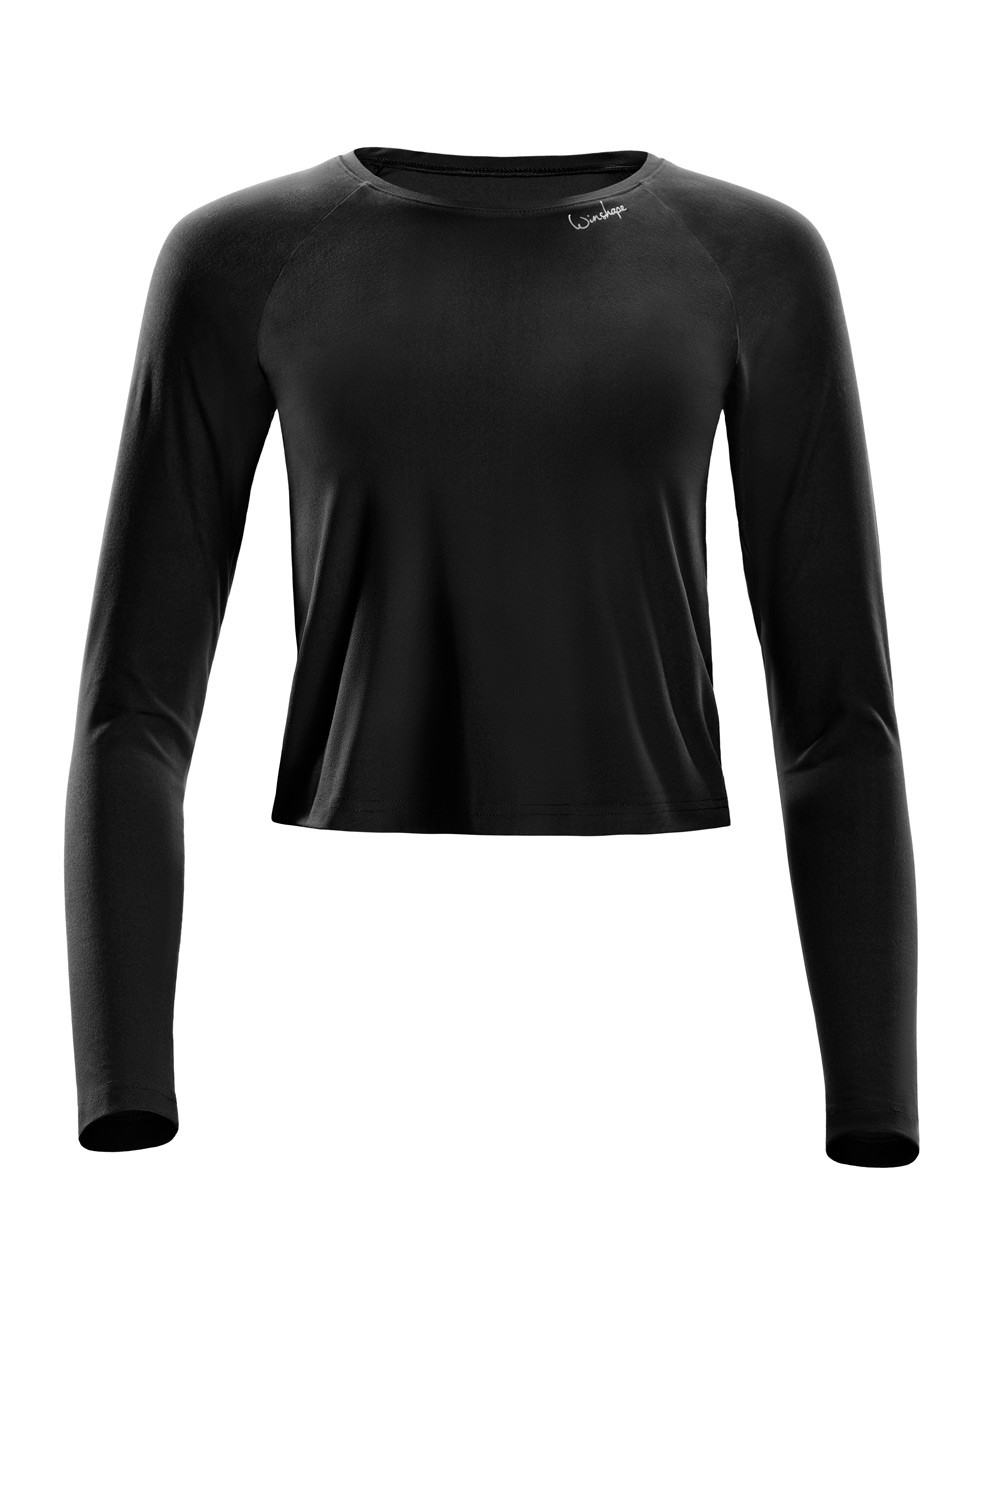 Functional Light and Soft Cropped Long Sleeve Top AET119LS, schwarz,  Winshape Ultra Soft Style | Rundhalsshirts